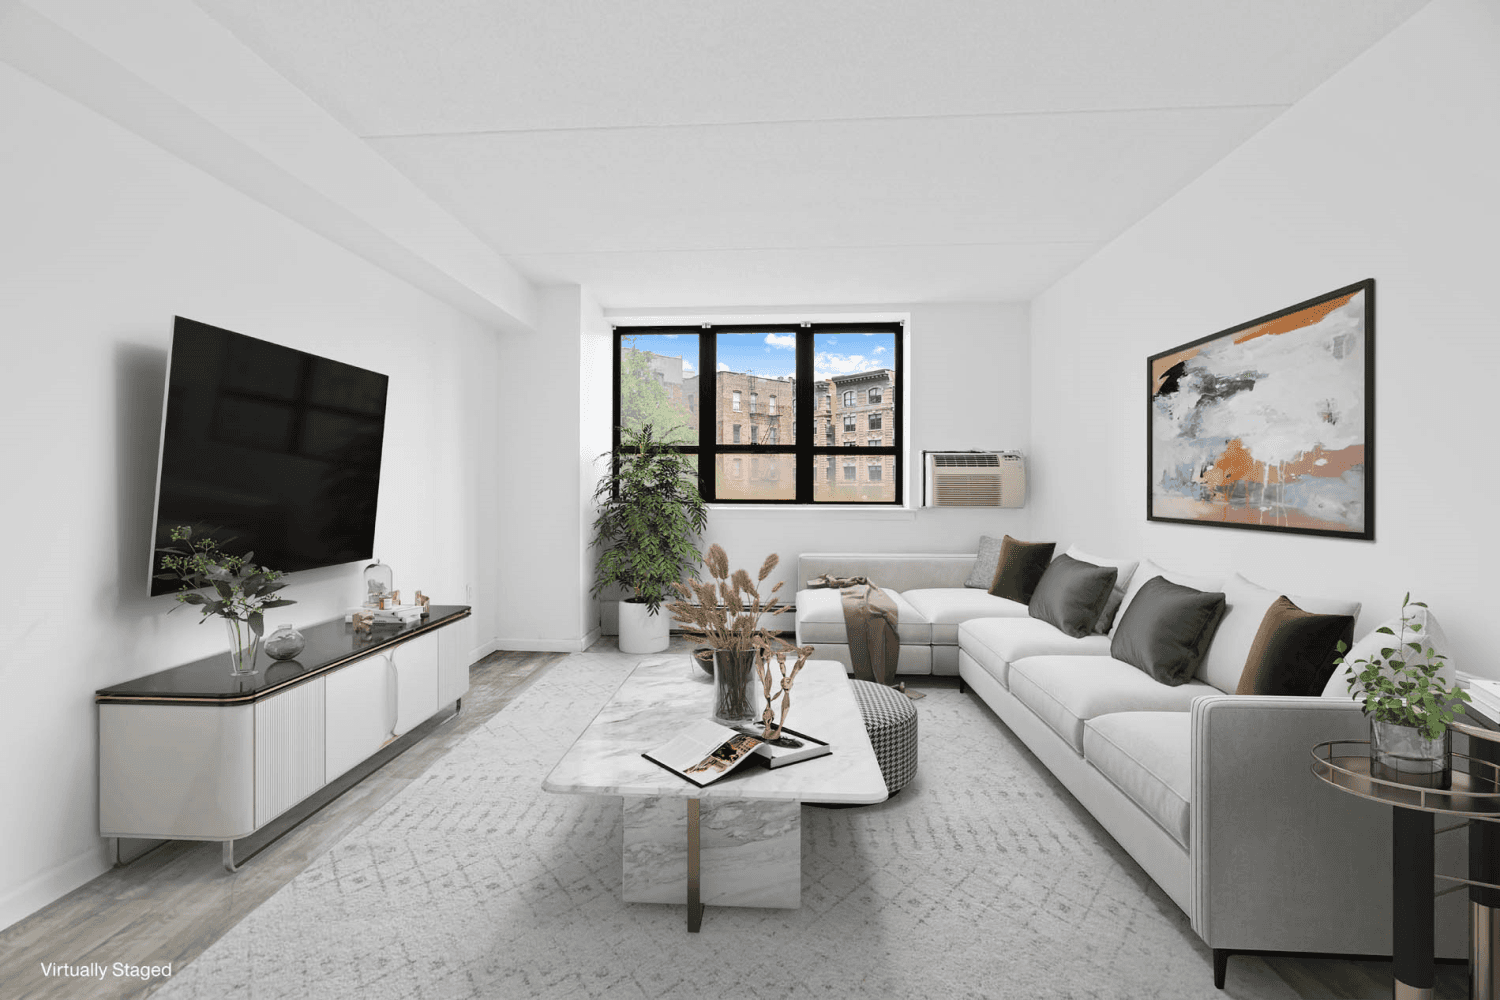 Welcome home to this newly renovated 1 bedroom, filled with light and overlooking the beautiful tree filled courtyard.